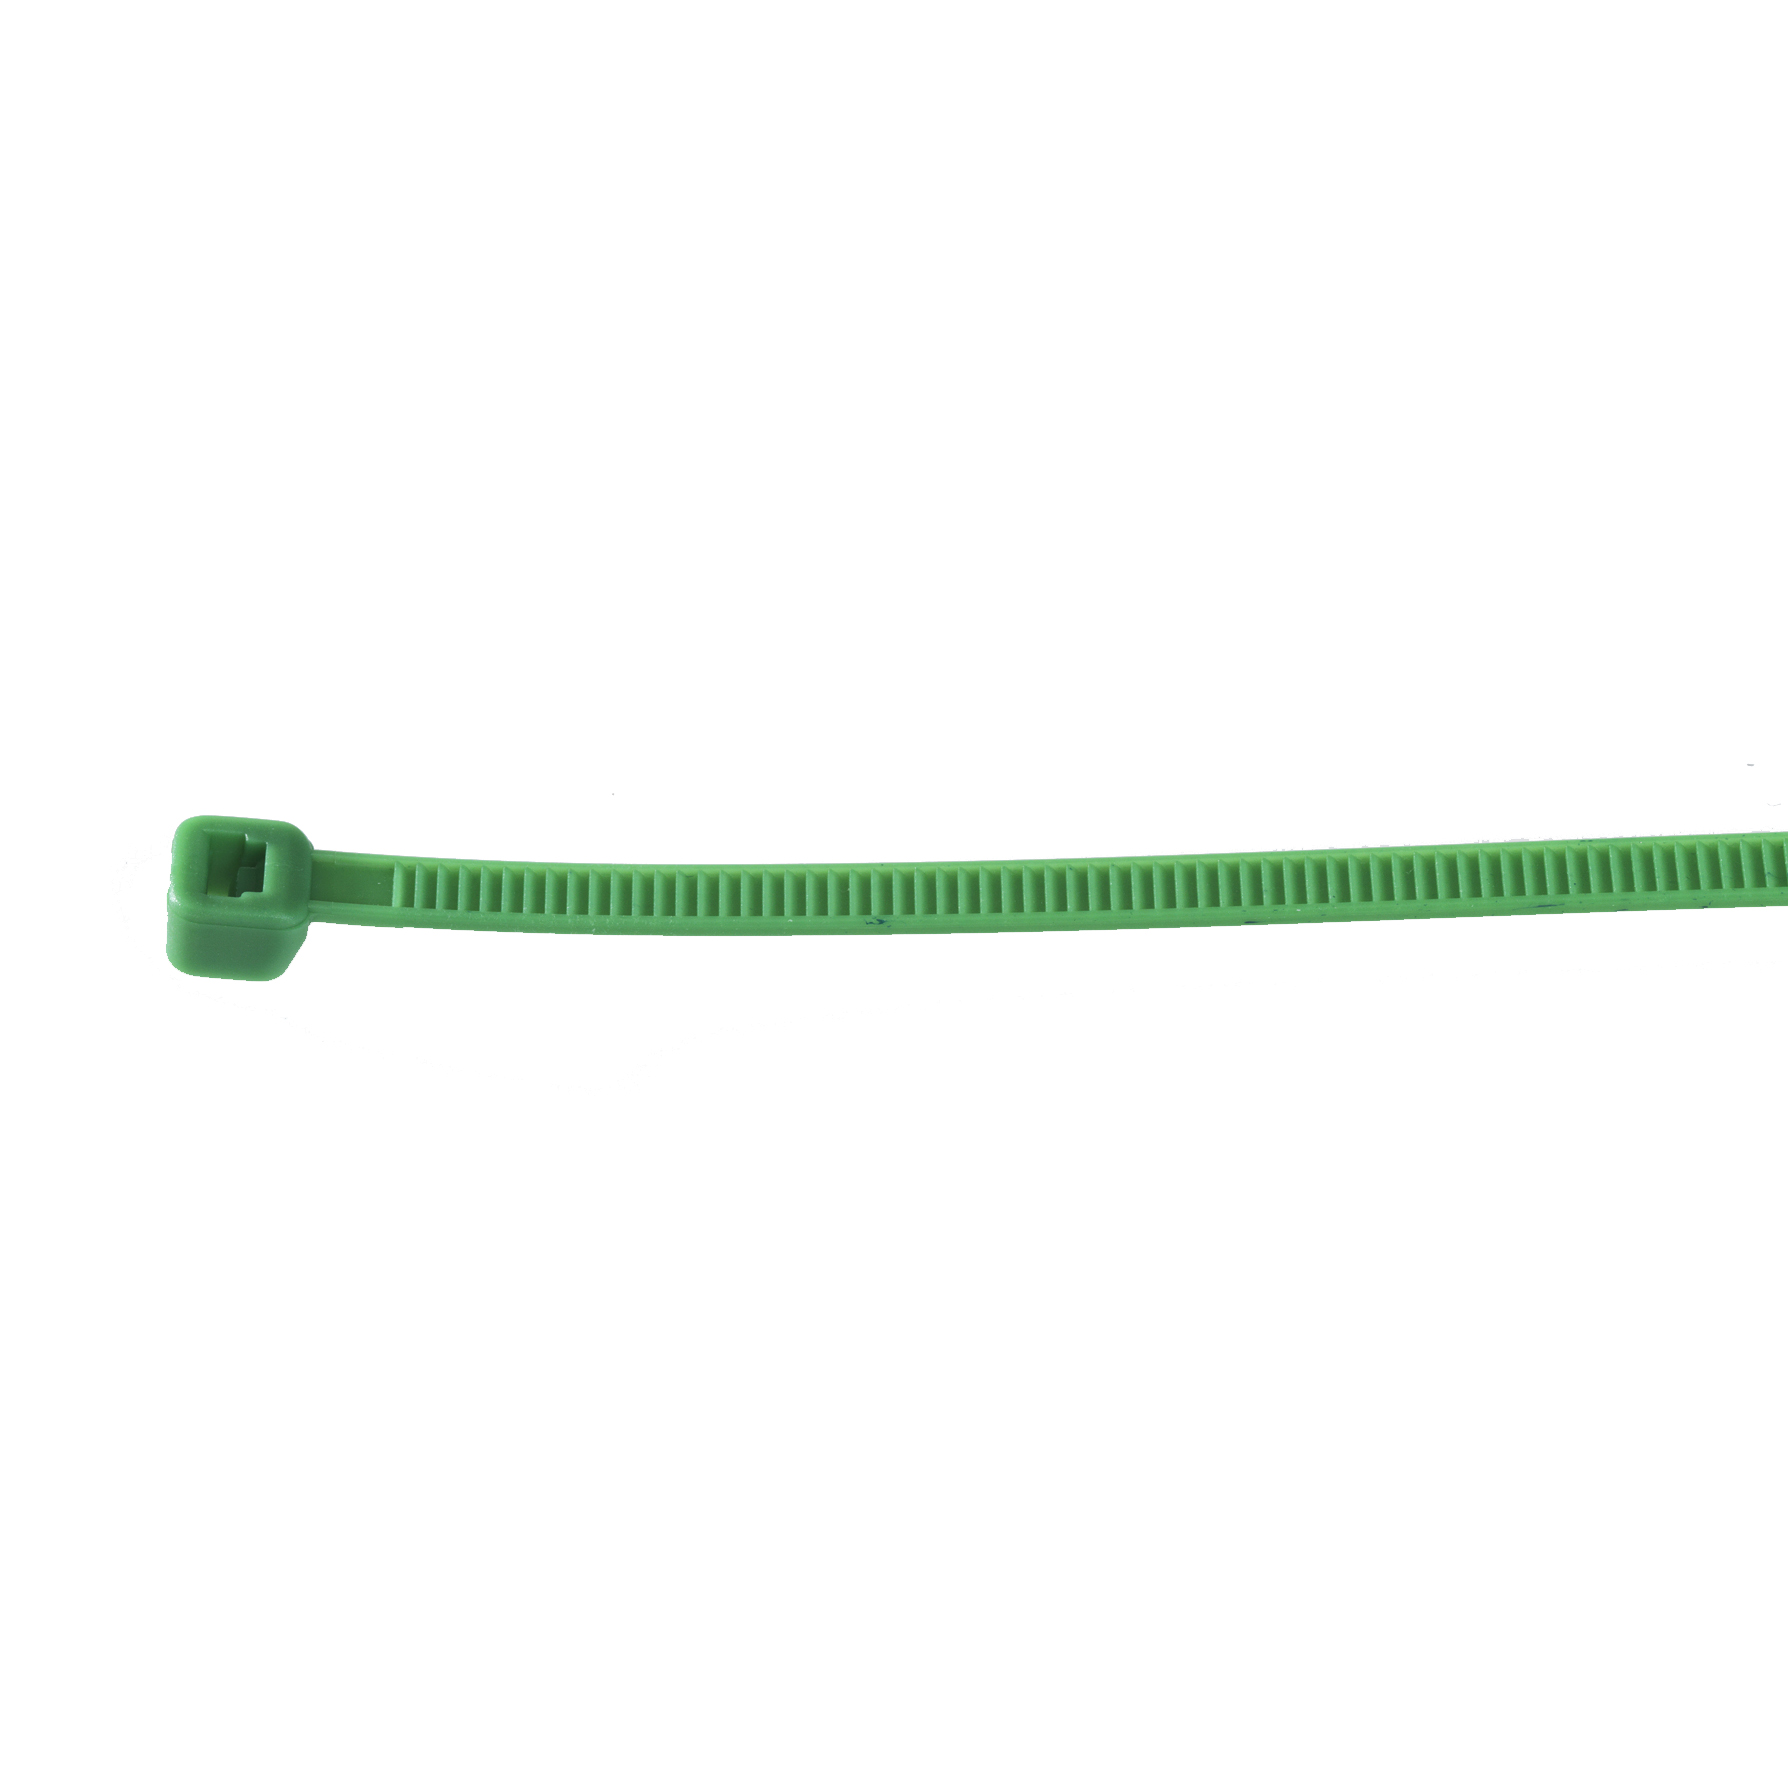 Large, Green Cable Tie Image